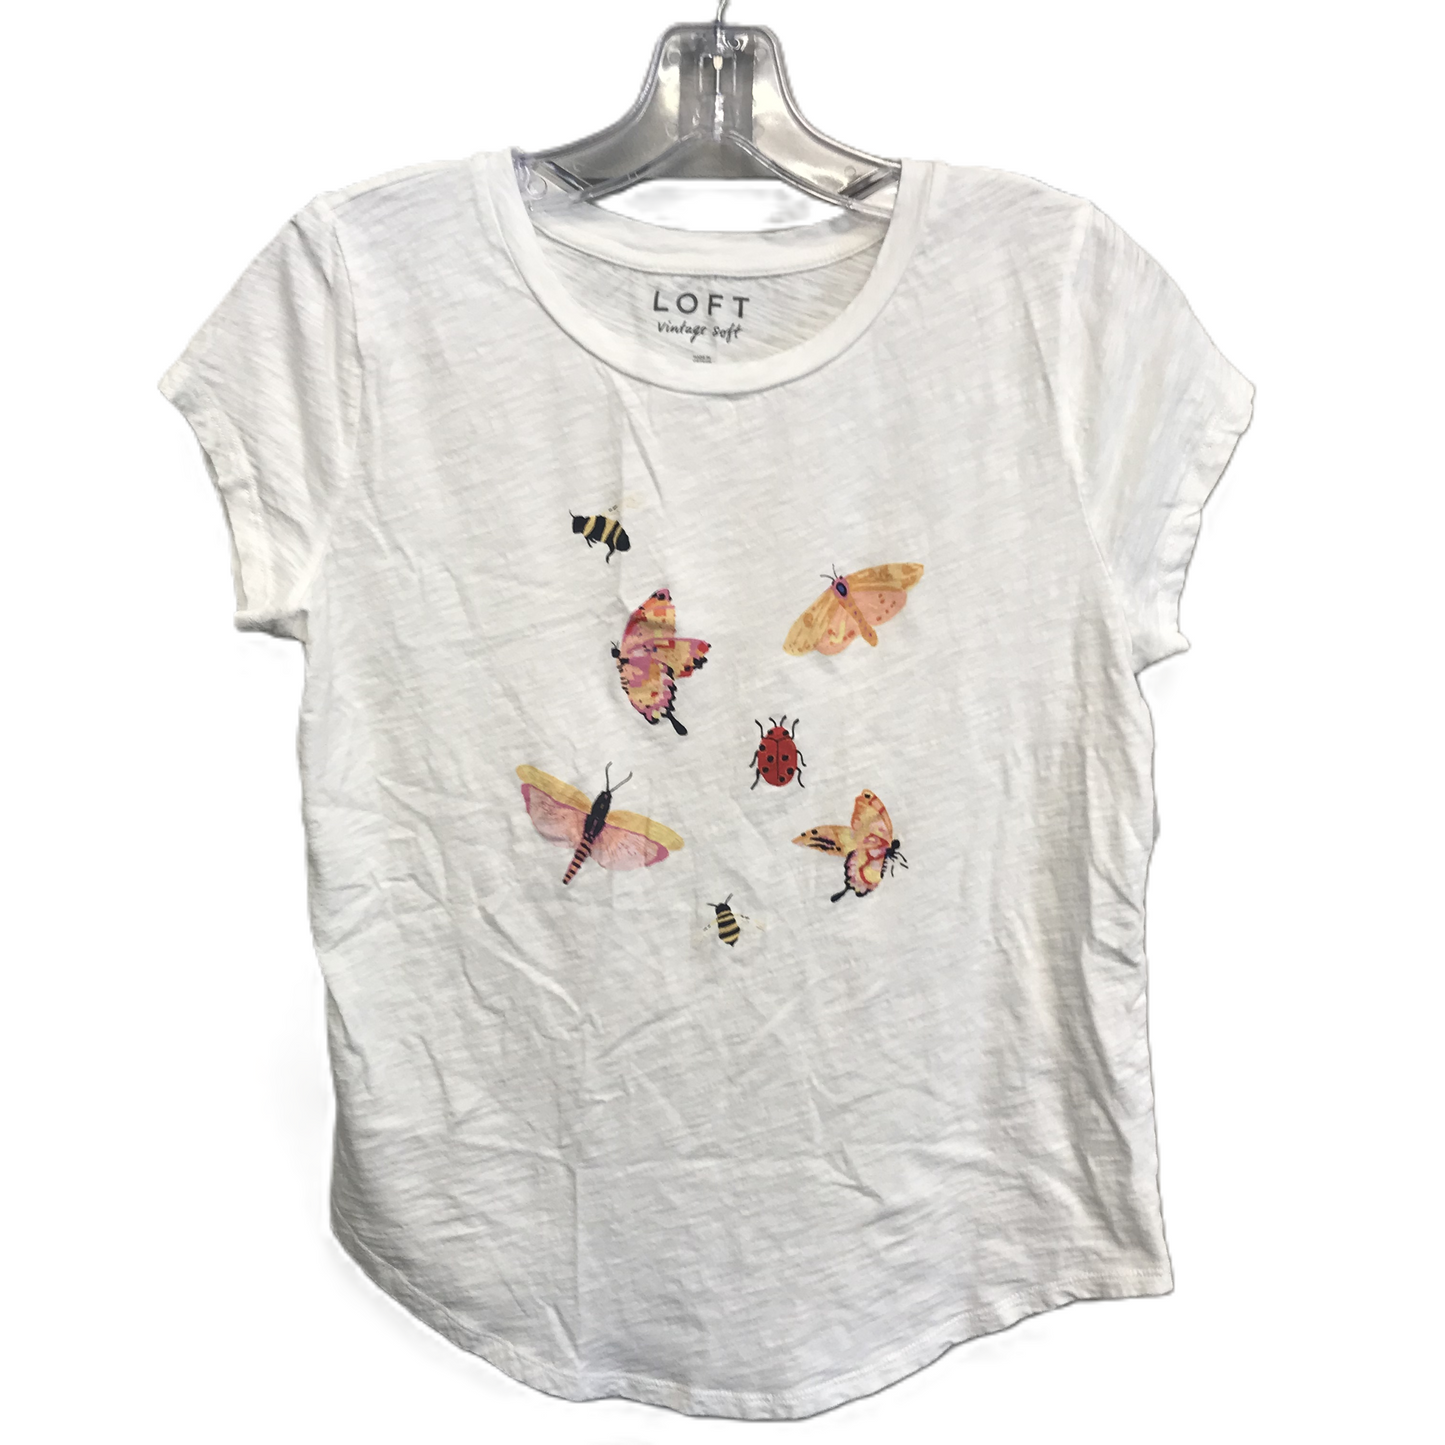 White Top Short Sleeve By Loft, Size: M